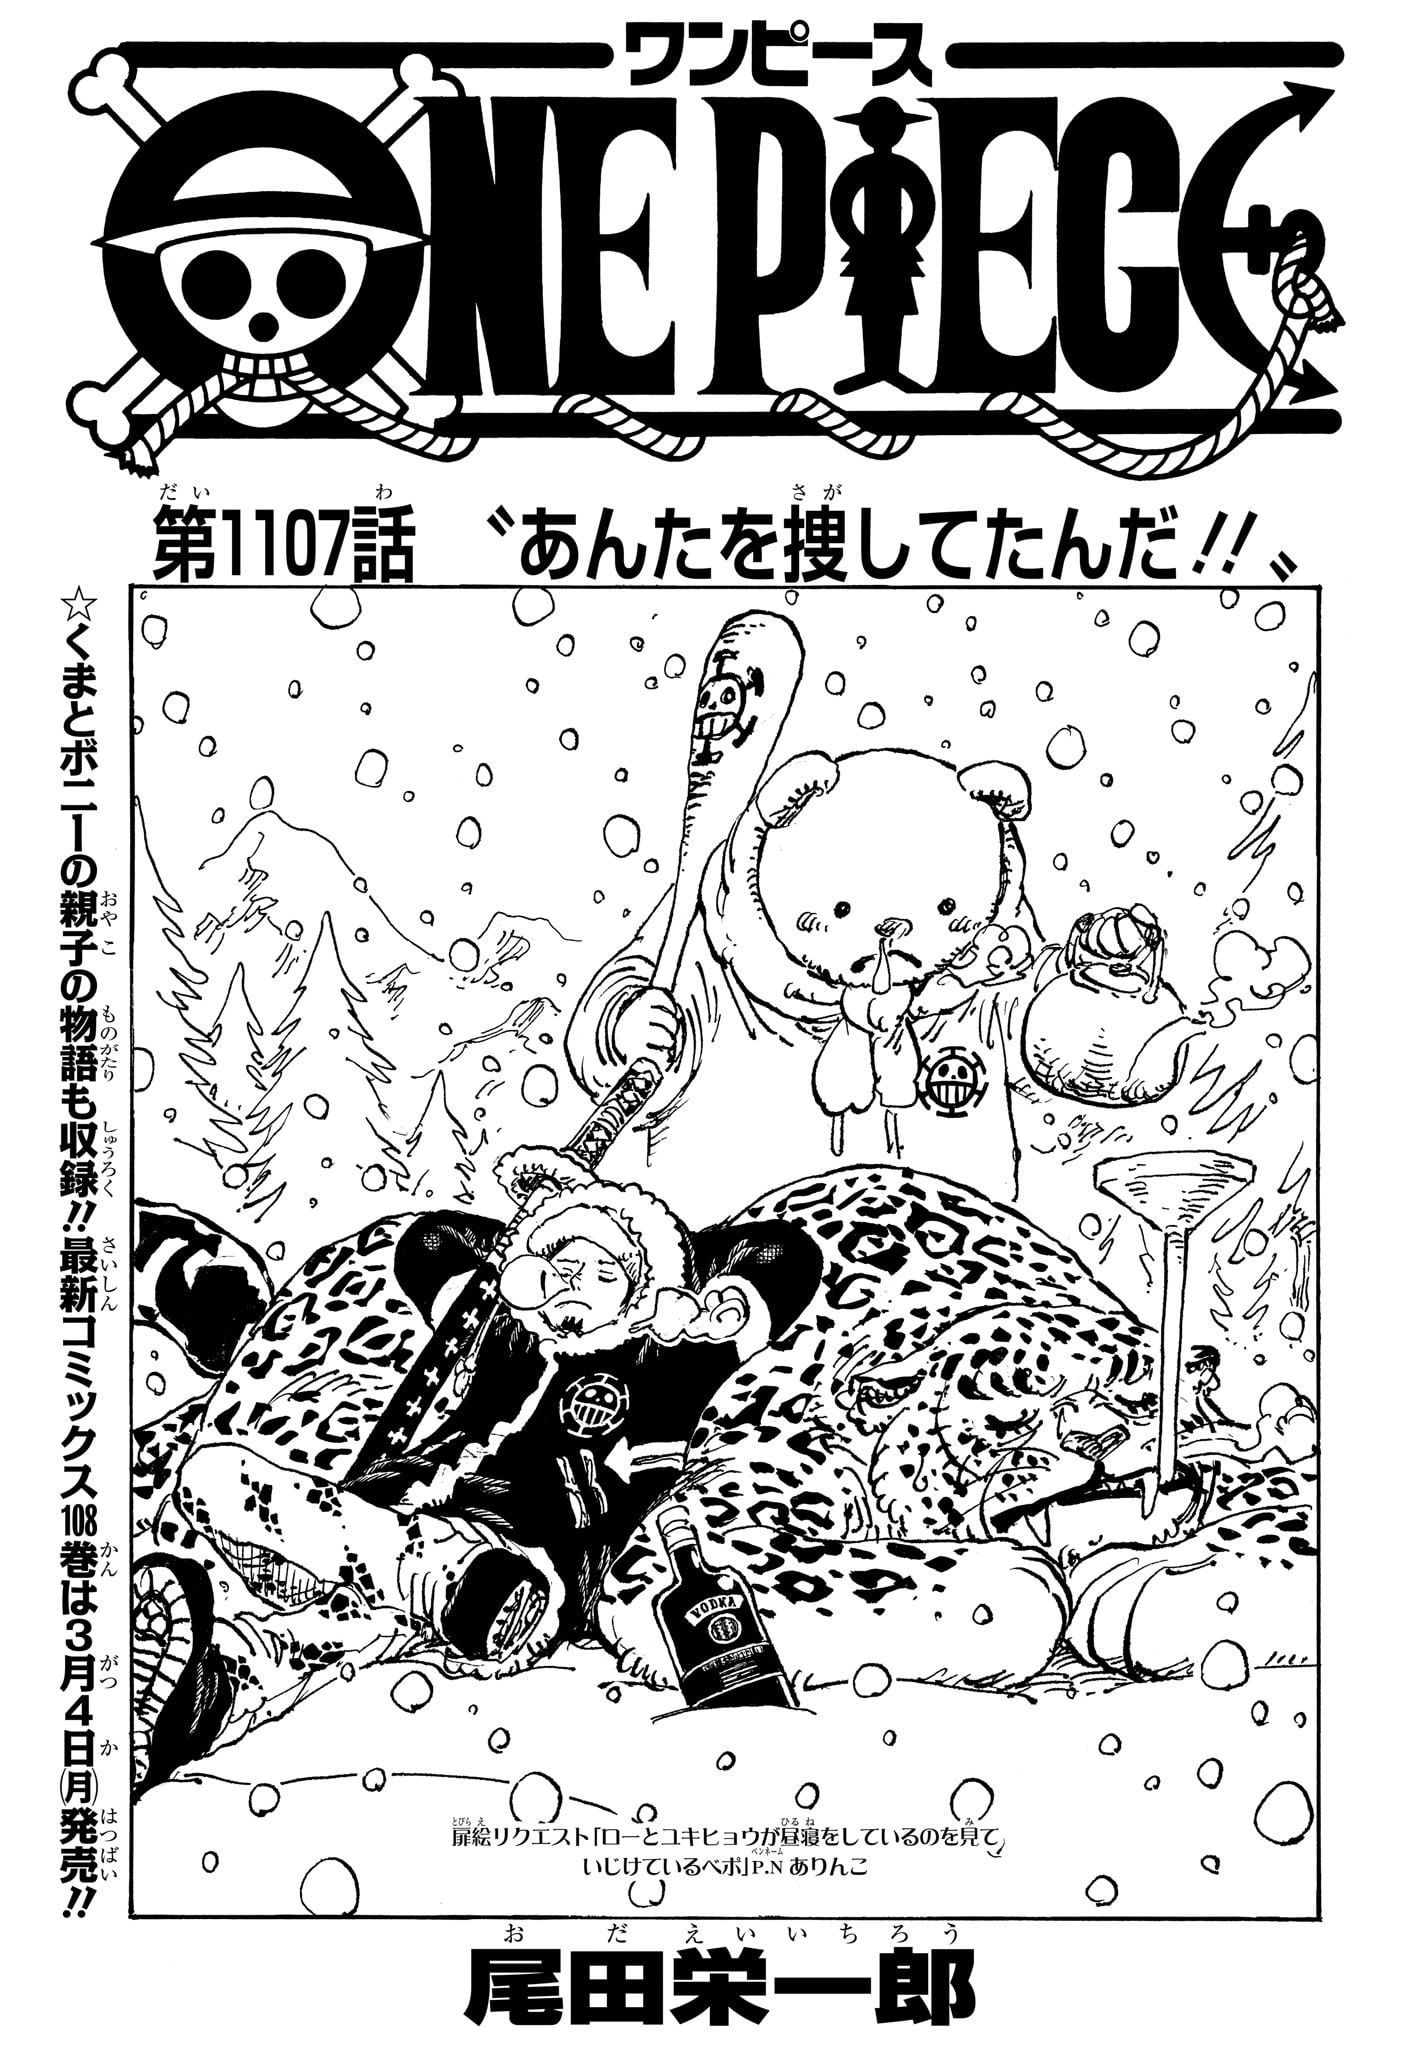 One Piece - Chapter 1107 - Page 1